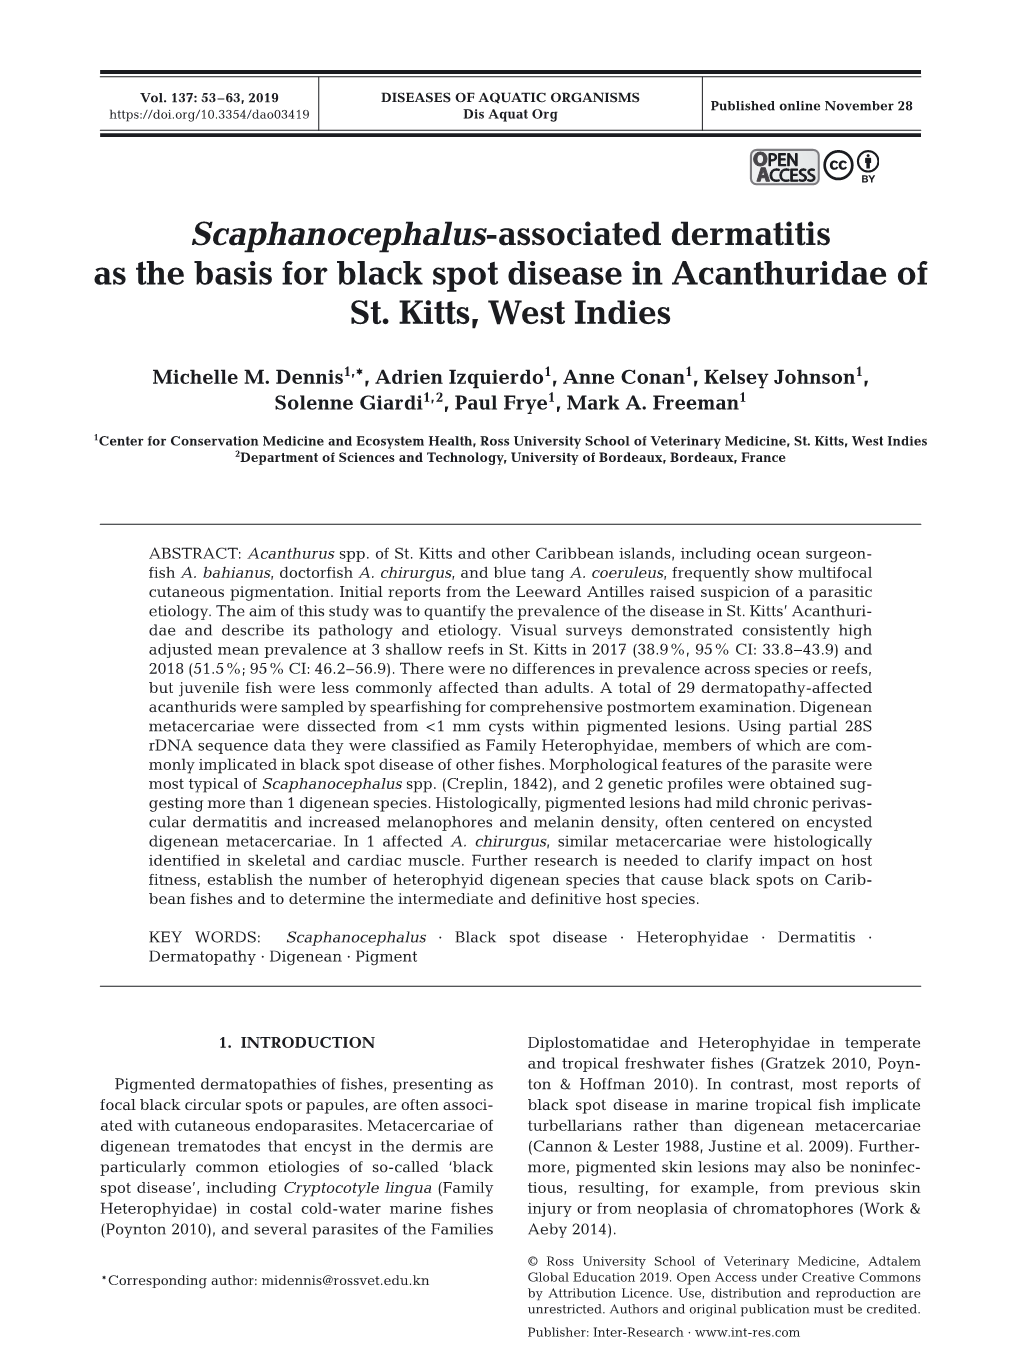 Scaphanocephalus-Associated Dermatitis As the Basis for Black Spot Disease in Acanthuridae of St